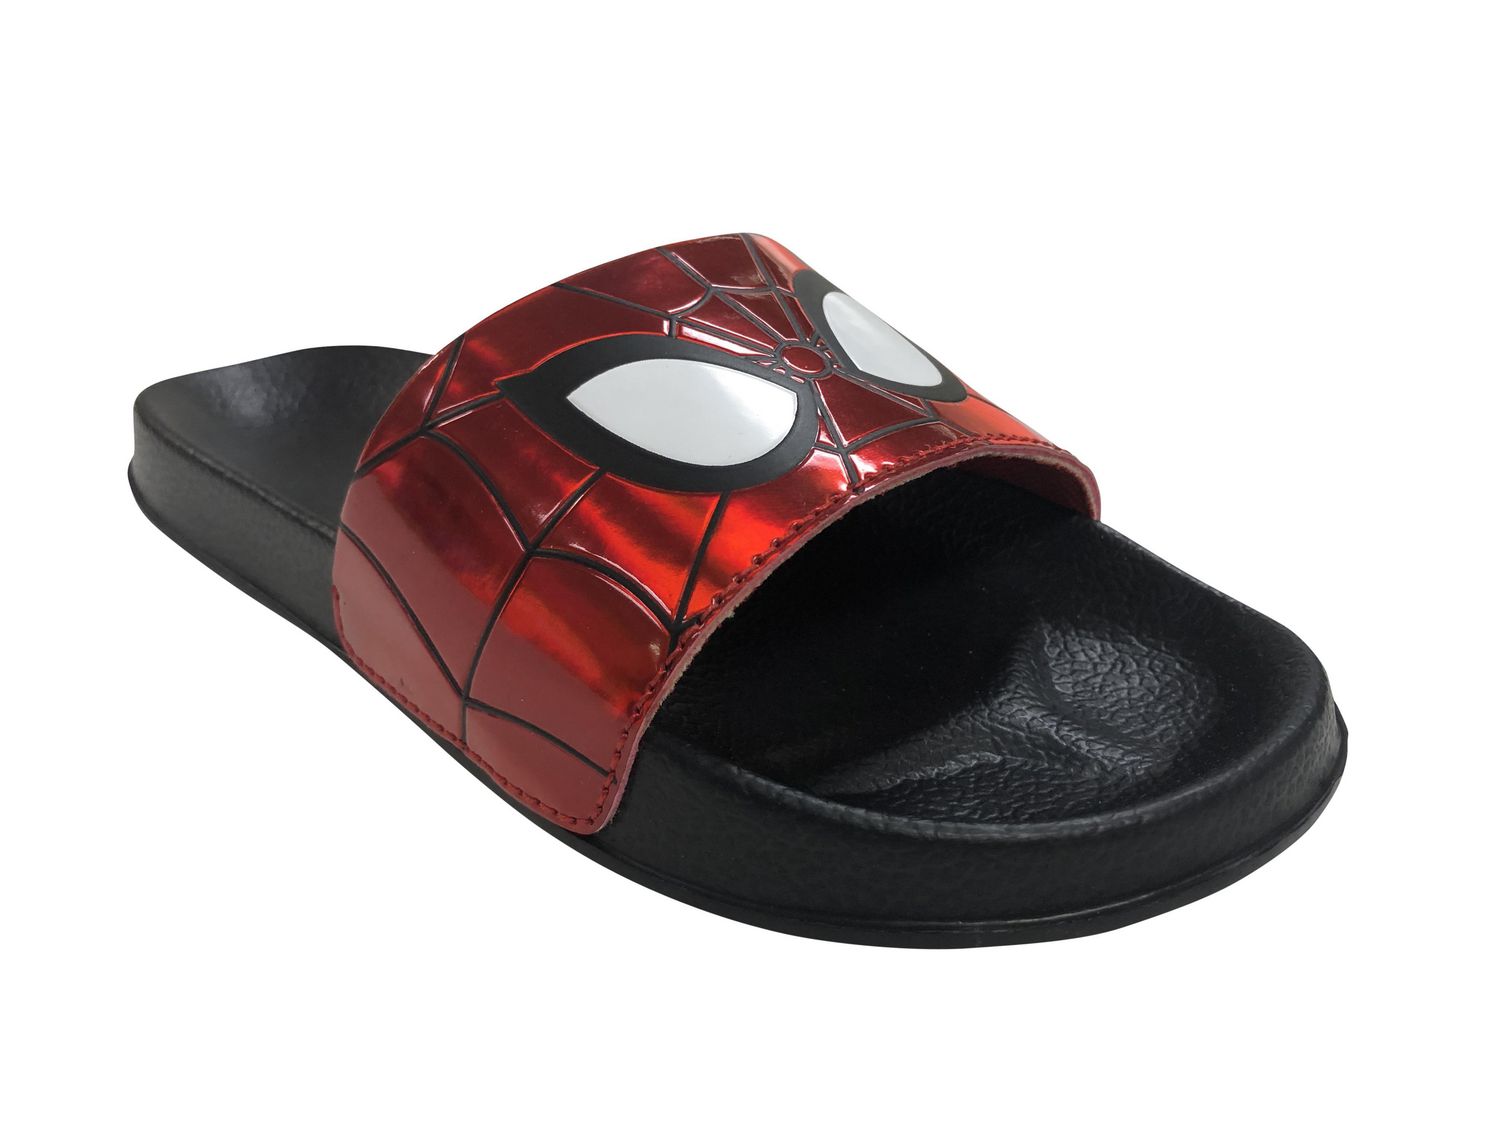 Marvel Spiderman Official Boys Clogs or Sliders Flip Flops Sandals Waterproof with 3D Character Picture 8-13 Child UK Sizes 